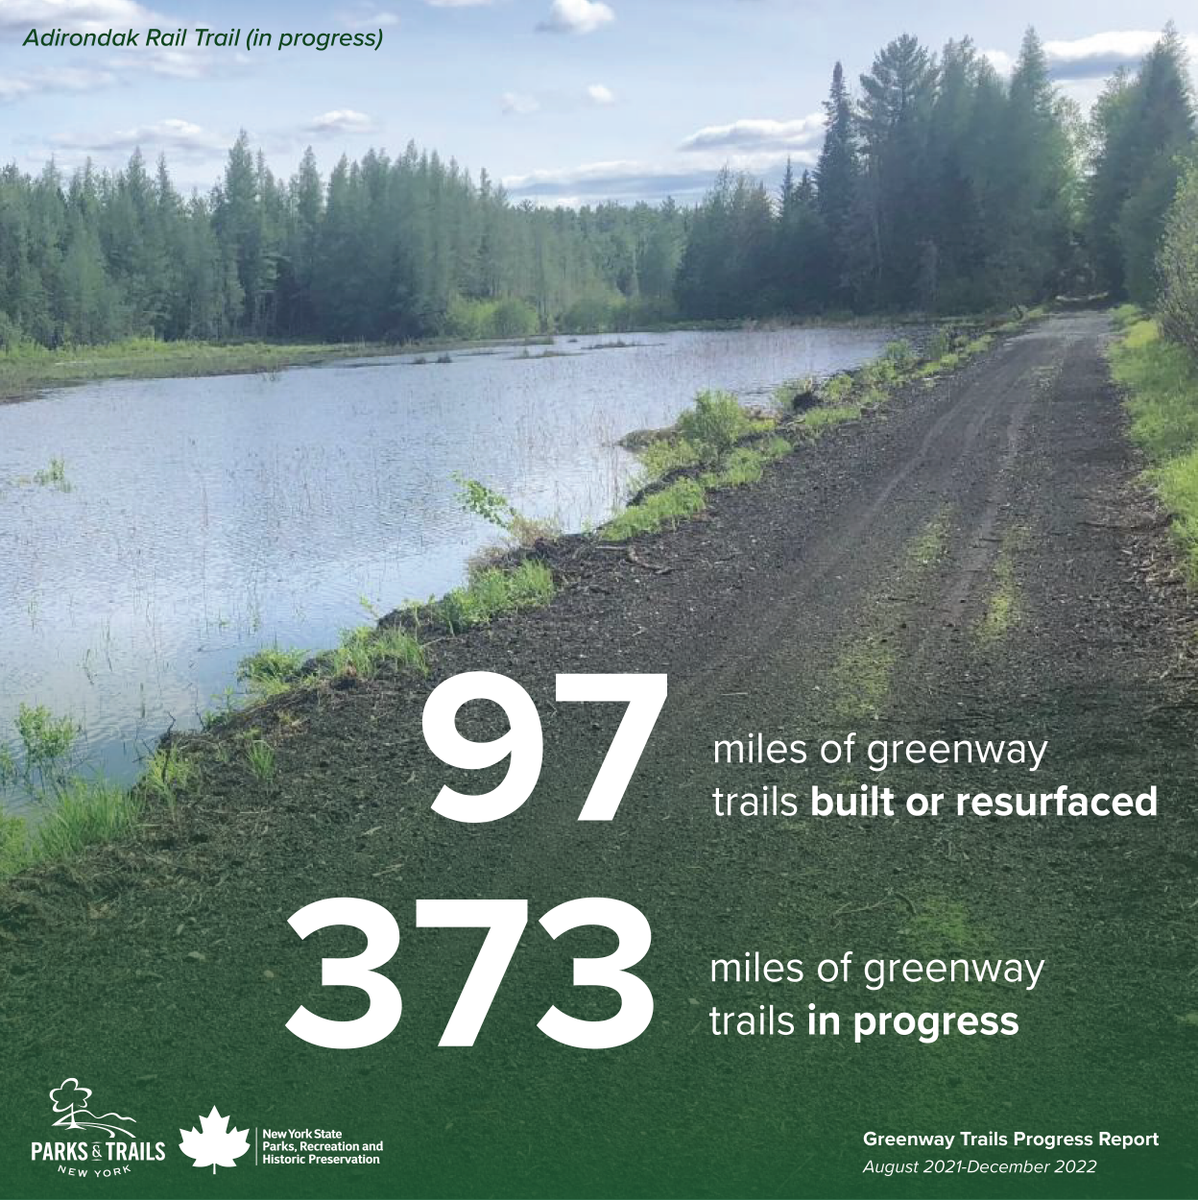 Together with @NYstateparks, we have just released a Greenway Trails Progress Report, highlighting nearly 100 miles of newly-completed trail projects, plus over 300 miles of additional trails in progress across the state 🎉 Read the report: ptny.org/application/fi…